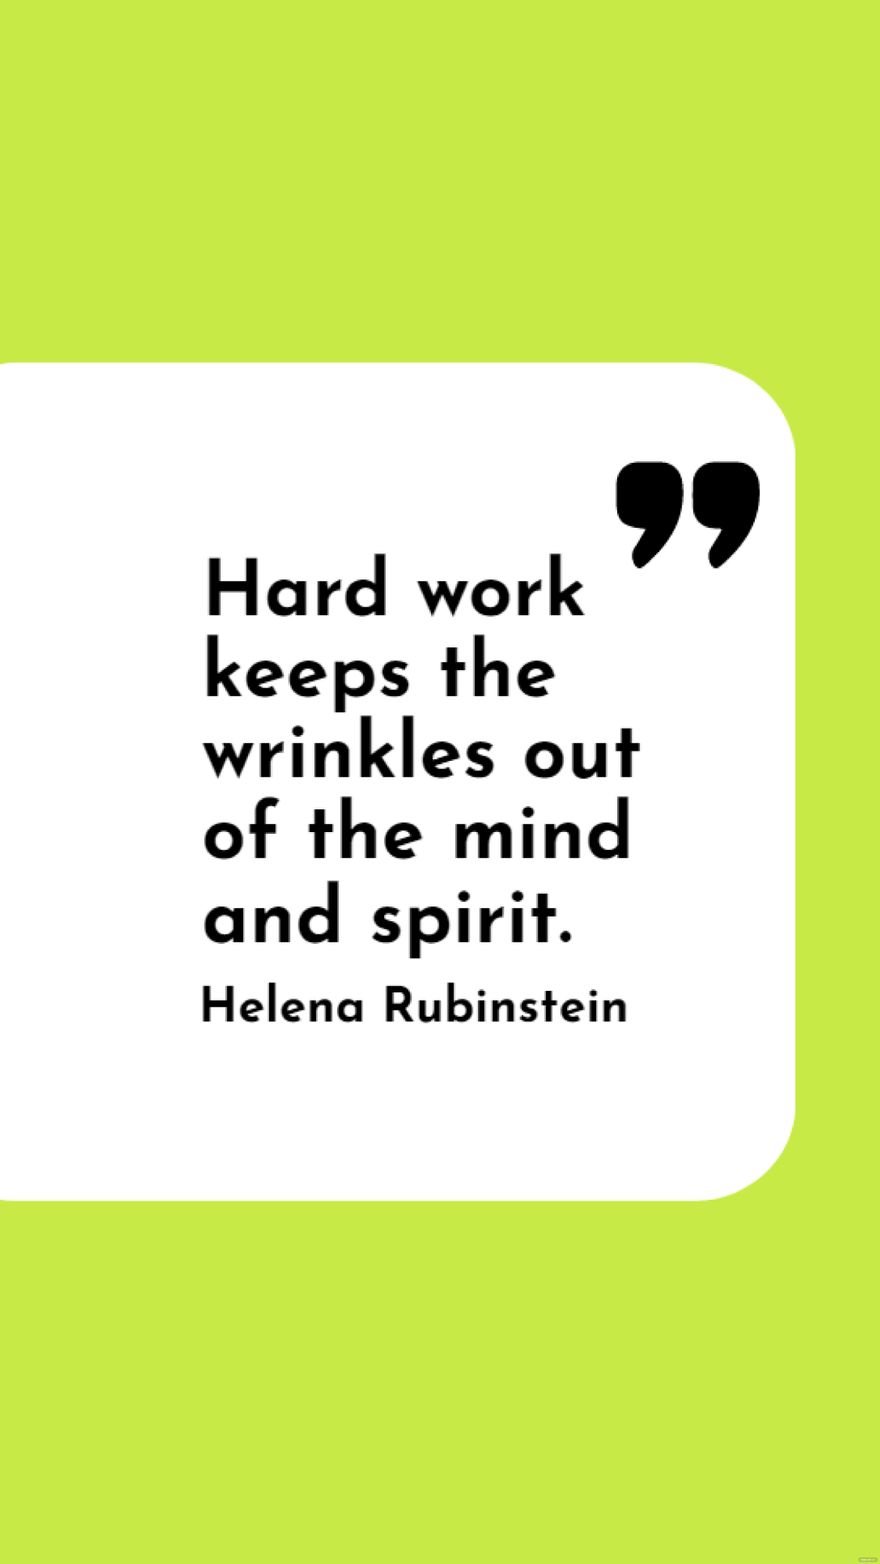 Free Helena Rubinstein - Hard work keeps the wrinkles out of the mind and spirit. in JPG